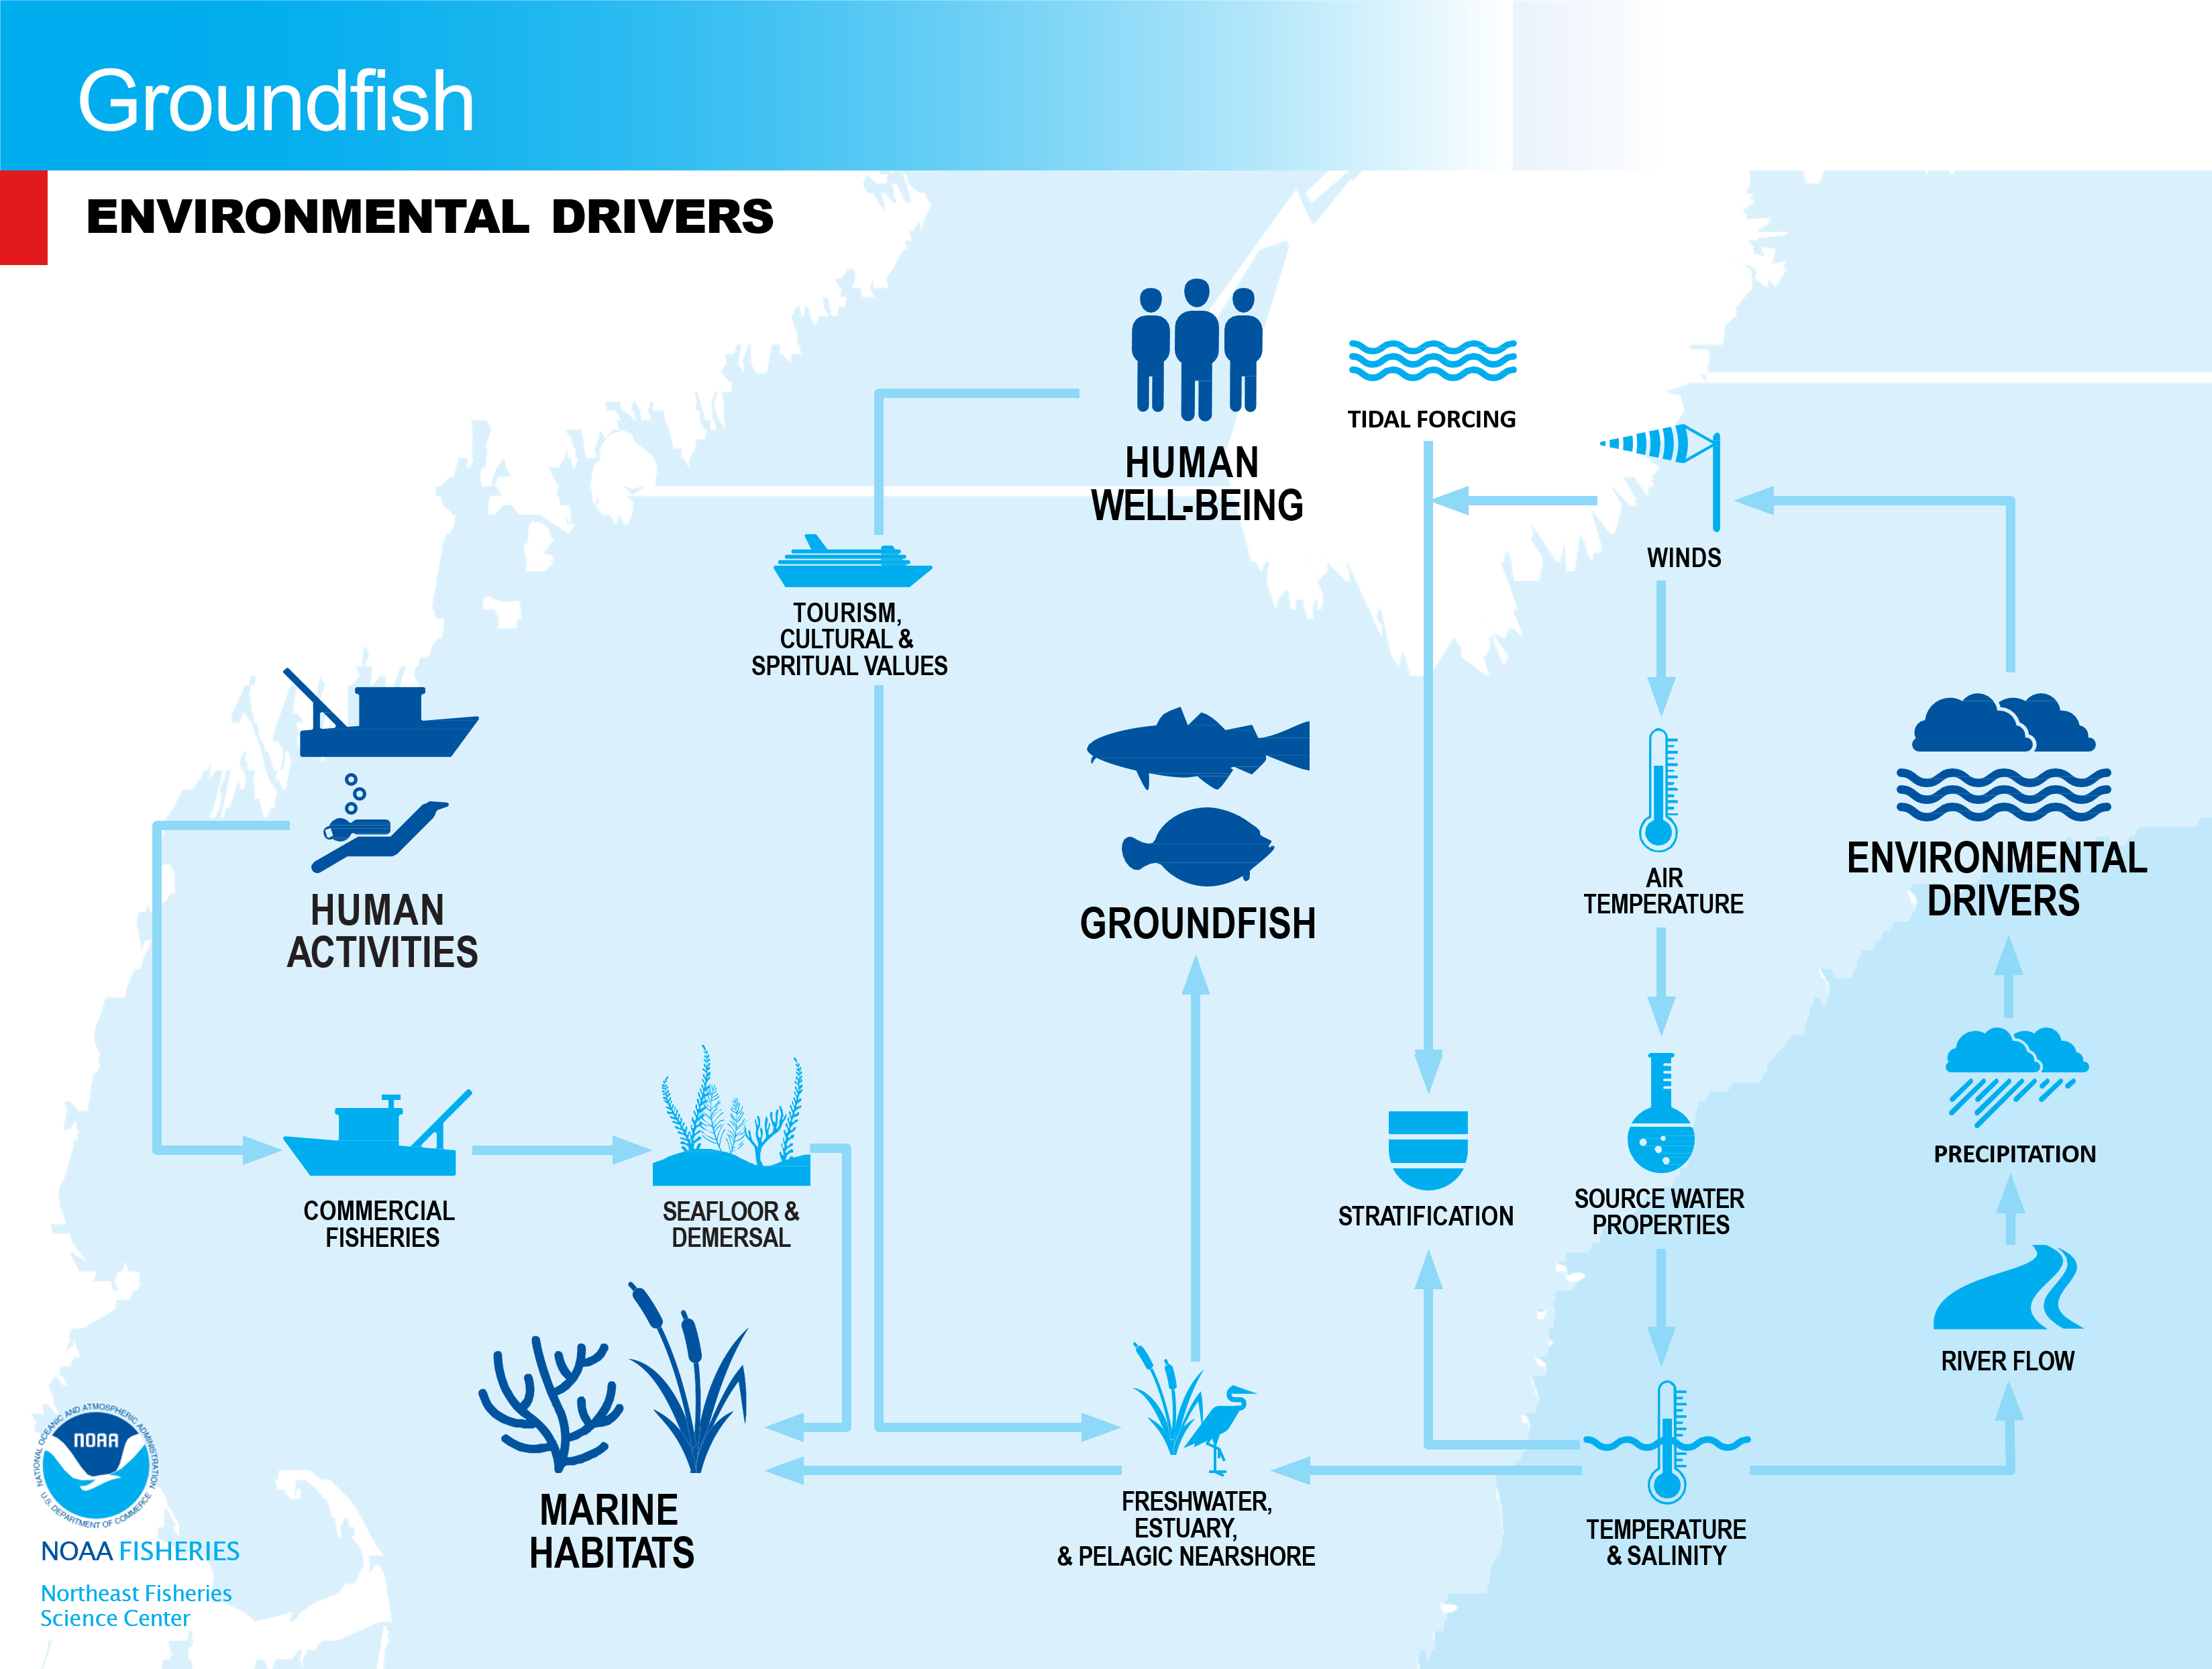 Conceptual model of groundfish environmental drivers in the NE-LME.